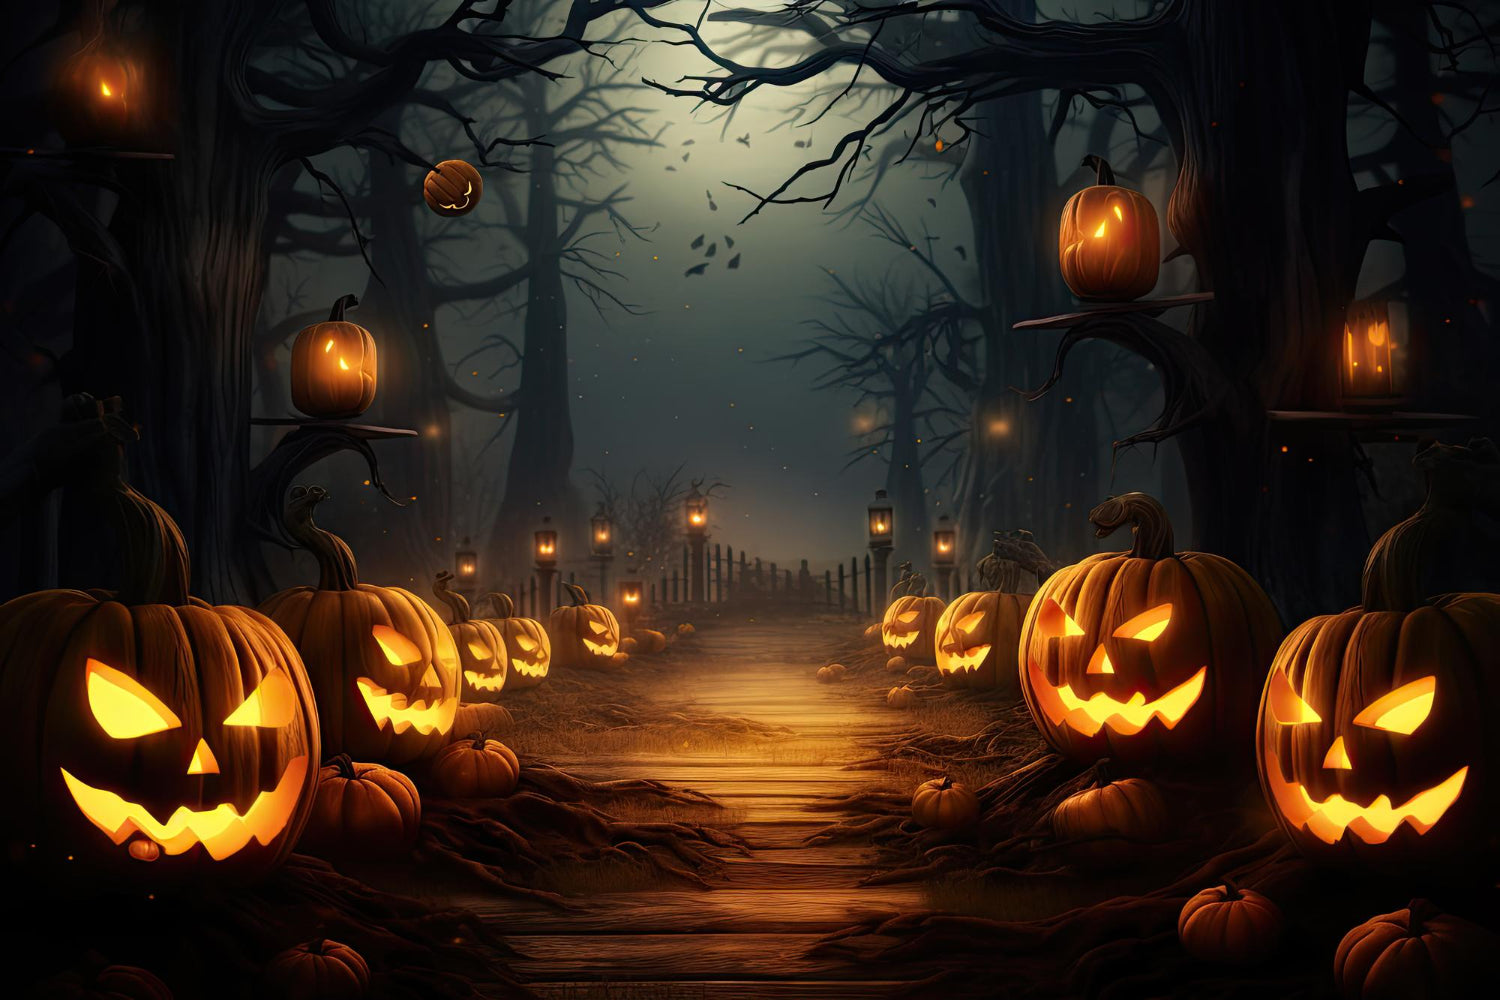 <a href="https://www.freepik.com/free-ai-image/halloween-background-with-scary-pumpkins-candles-bats-dark-forest-night_50609787.htm#query=Halloween&position=0&from_view=search&track=sph">Image By chandlervid85</a>